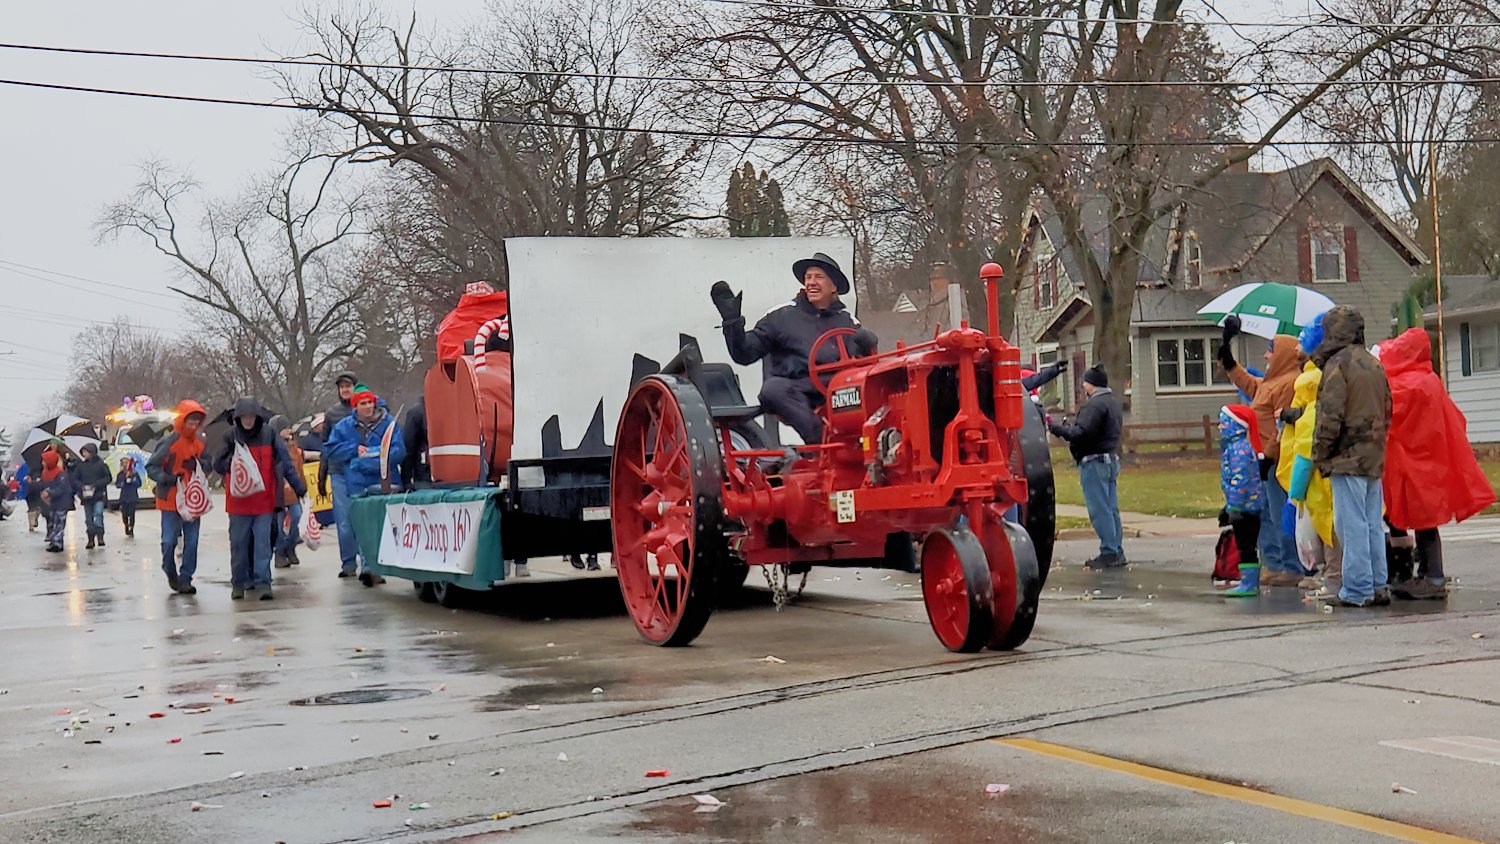 1937 vintage Farmall F-12 tractor pulling the Cary Troop 160 Boy Scouts float.